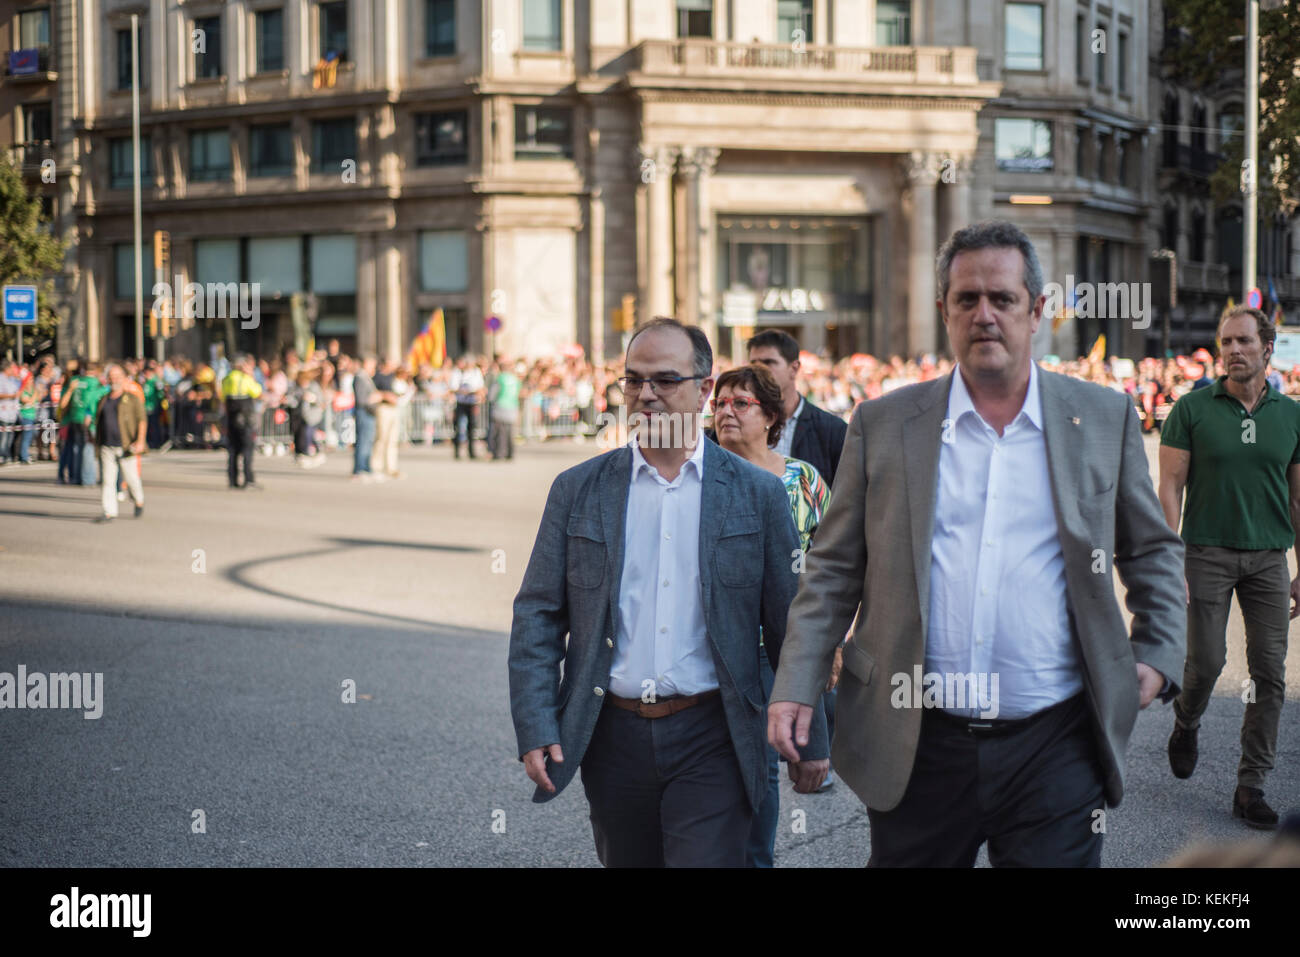 Barcelona, Spain. 21st October, 2017. Barcelona. Jordi Turull, adviser of the Presidency and Spokesman of the Government of the Generalitat of Catalonia arrrives to the demonstration against the imprisonment of the Catalan leaders Jordi Sánchez (ANC) and Jordi Cuixart (Òmnium Cultural) and the intervention of the Spanish State in the Government of Catalonia through Article 155 of the Constitution, never used before. All the main members of the Catalan government have attended the demonstration. Credit: Alamy / Carles Desfilis Stock Photo